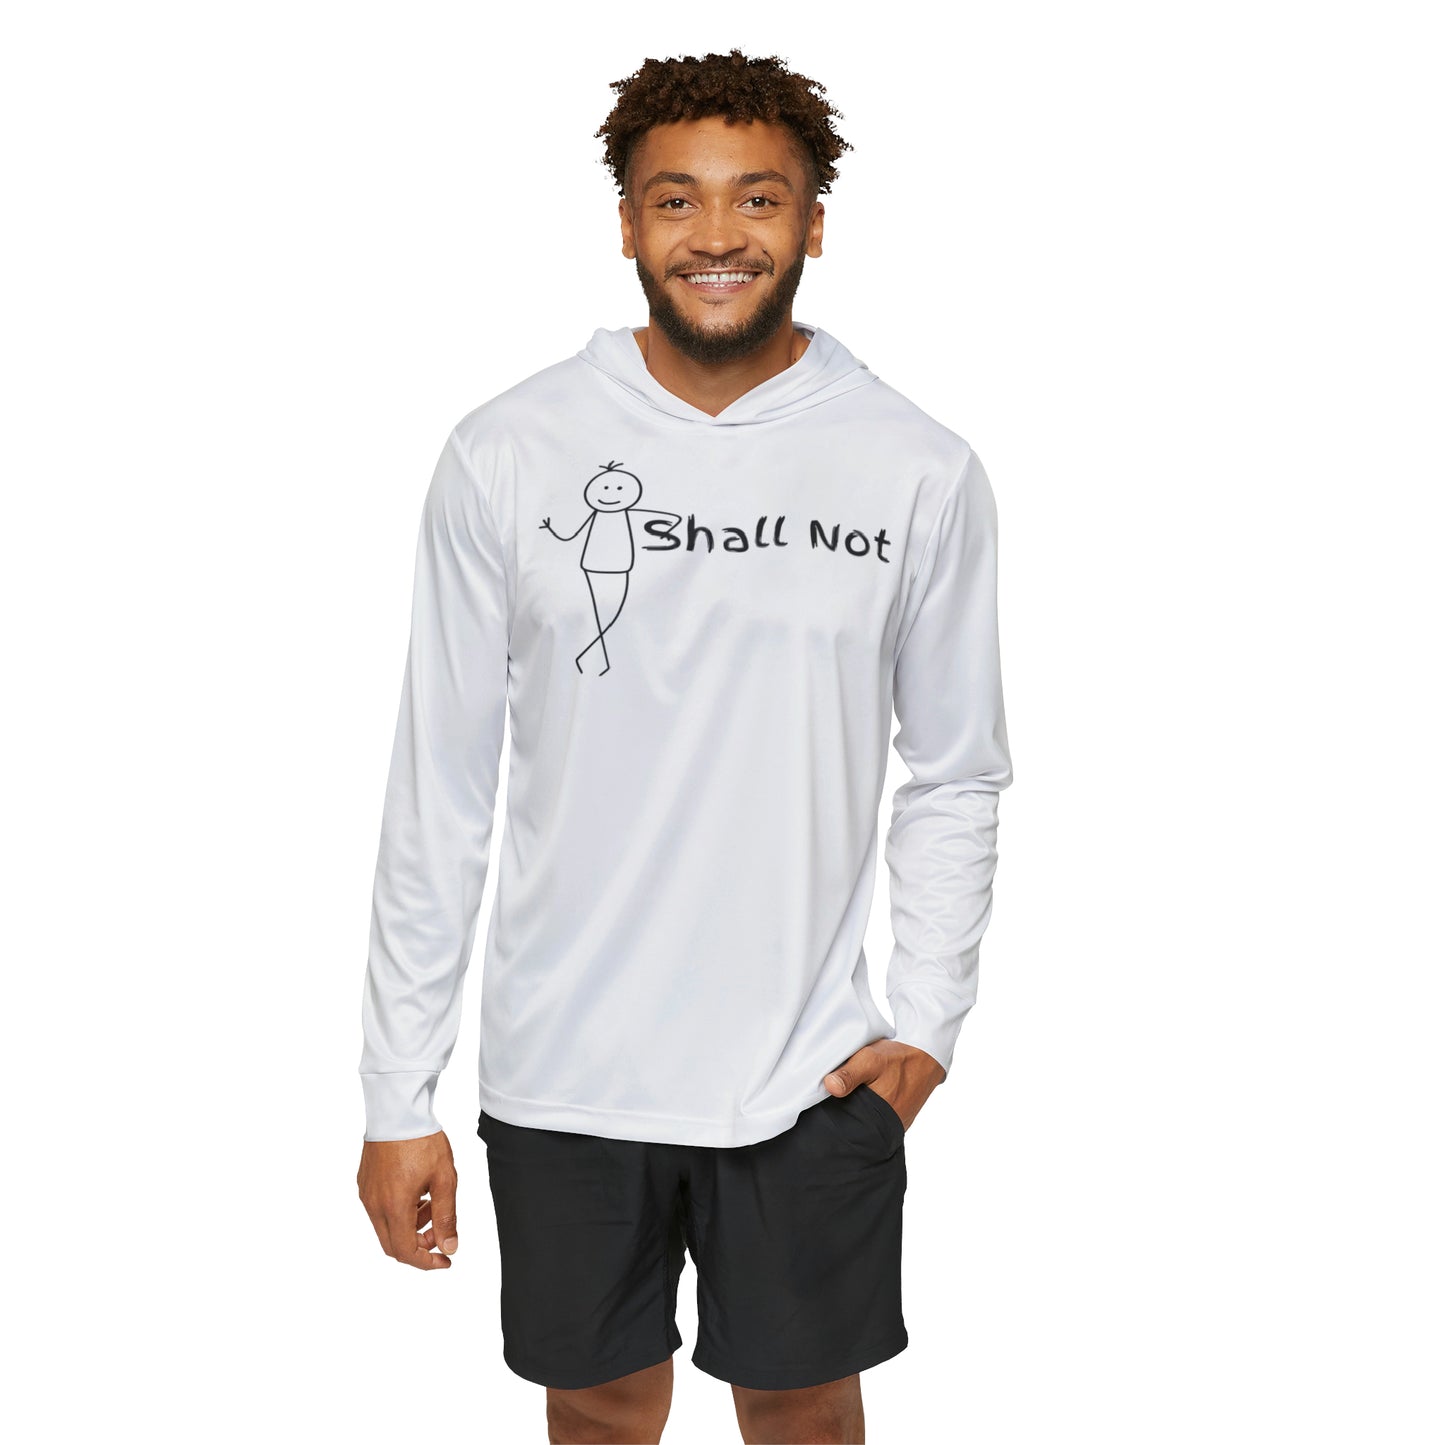 Shall Not (White/Black) - Men's Sports Warmup Hoodie